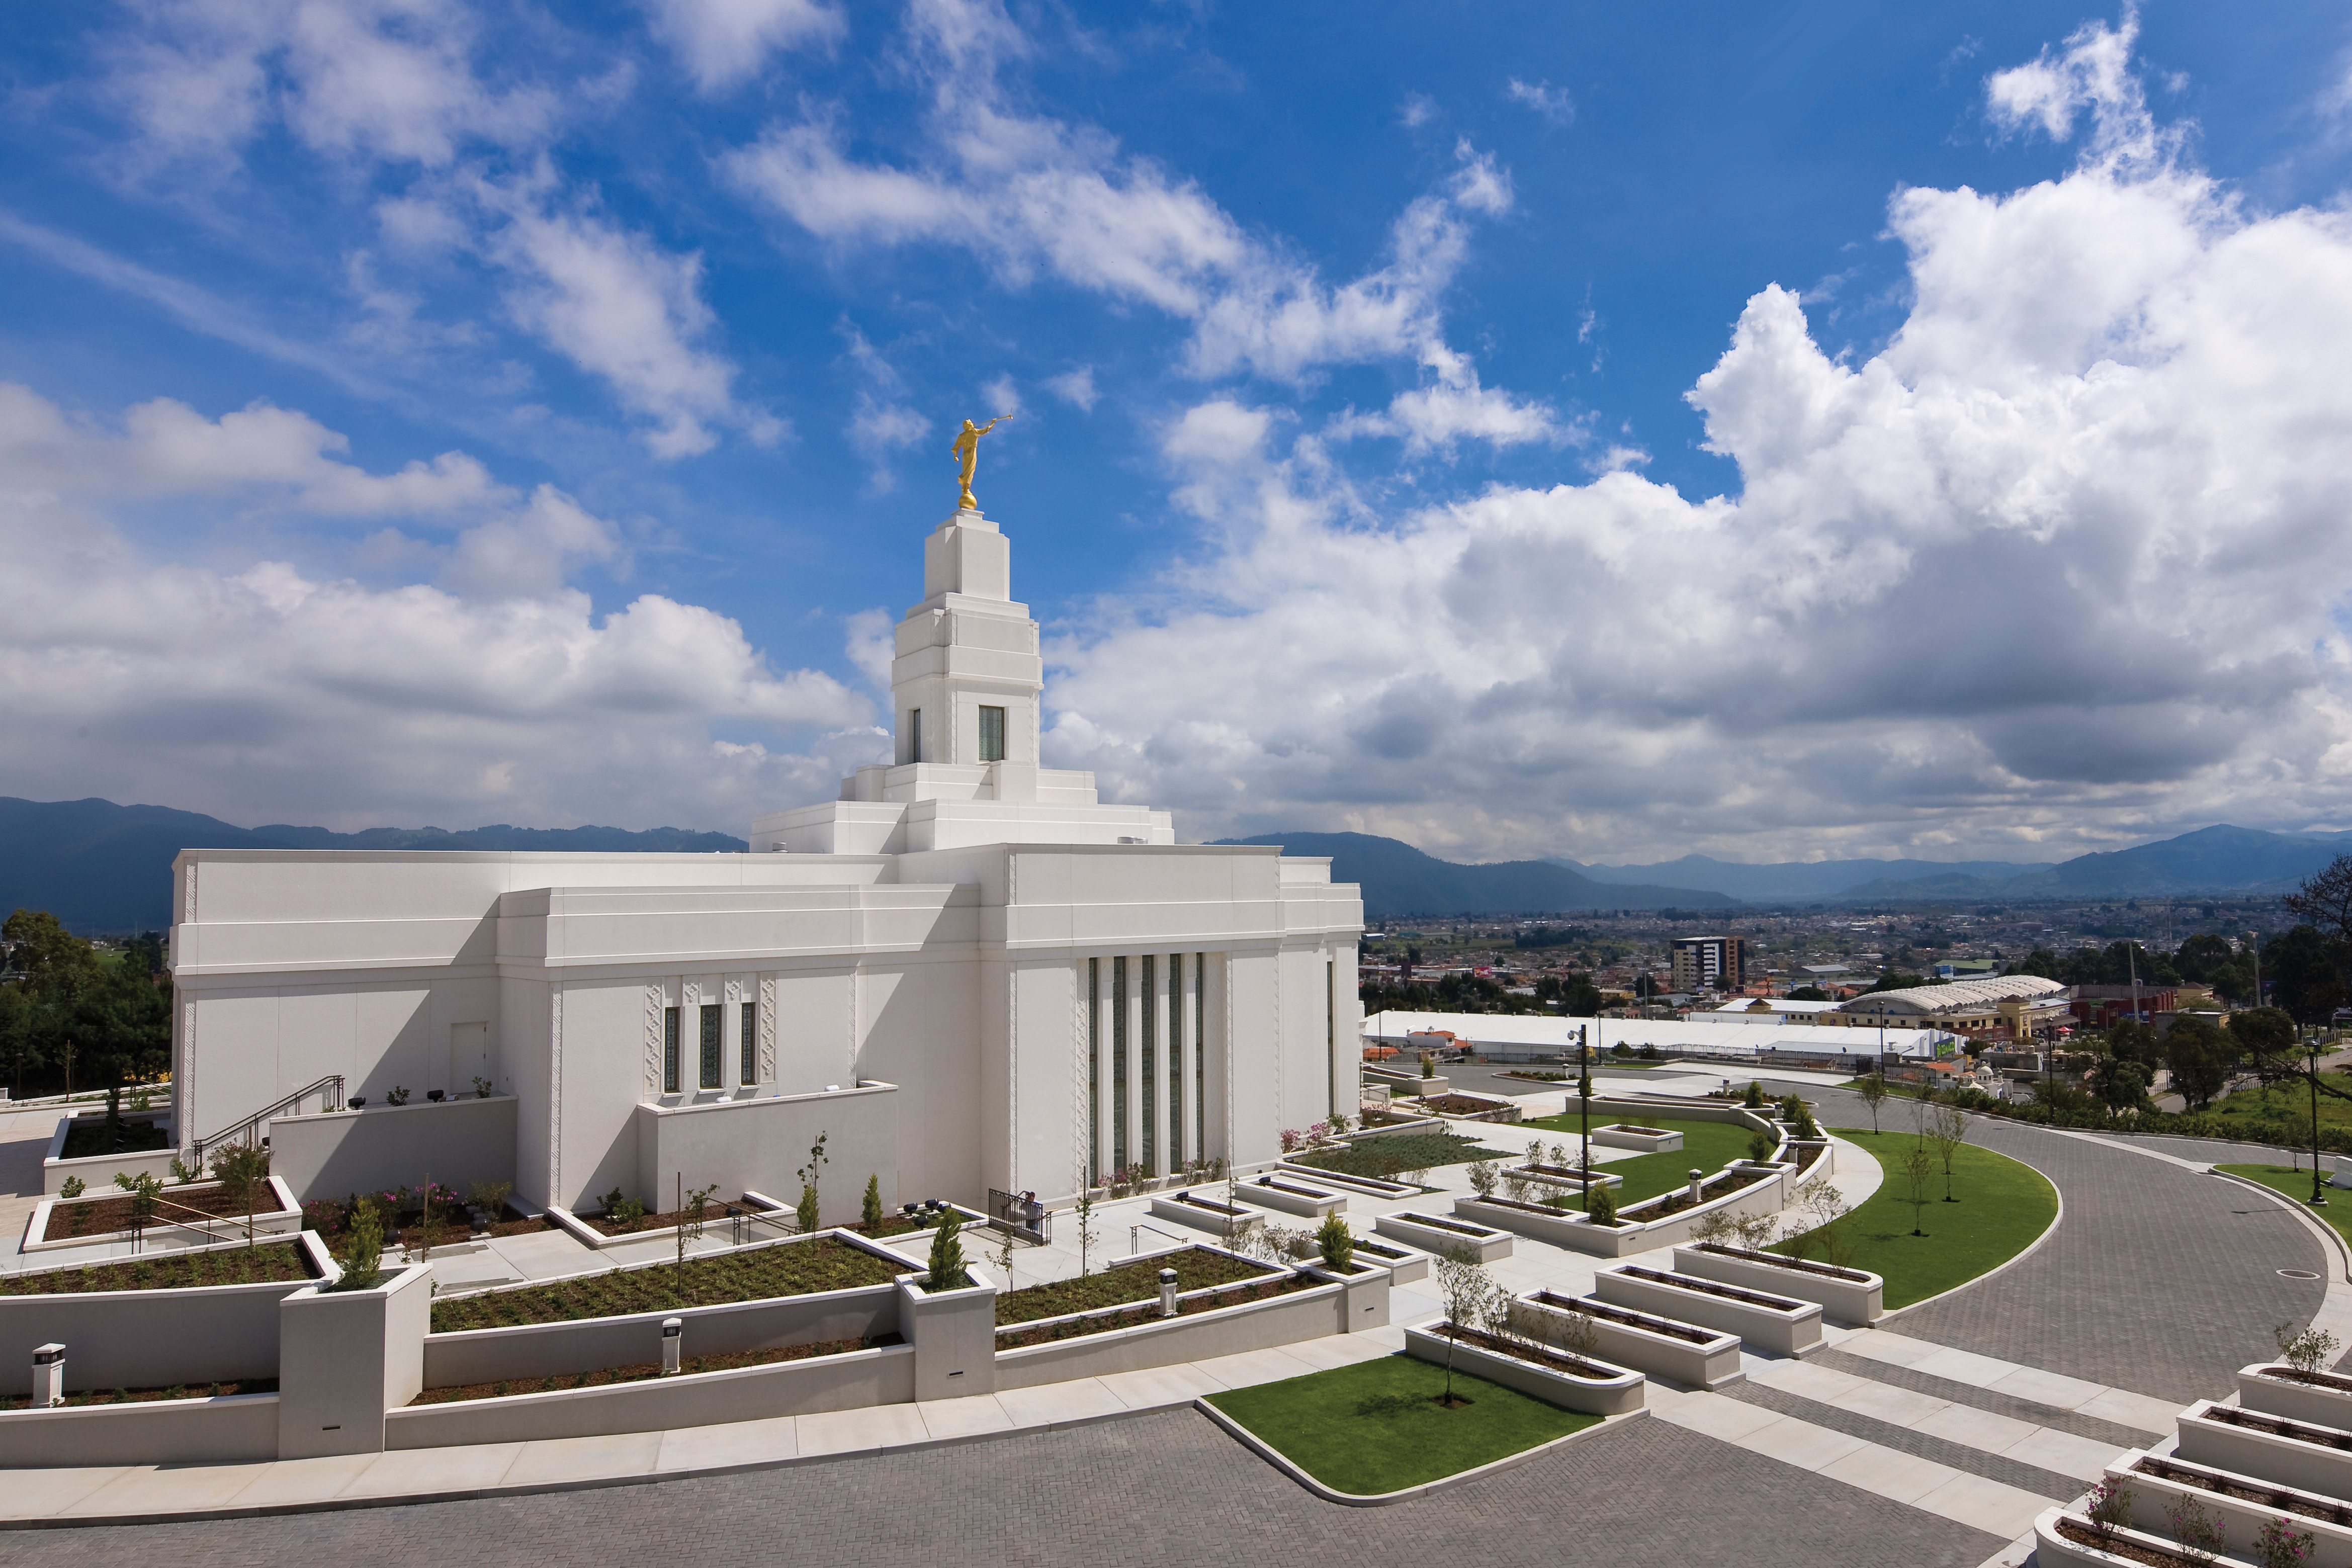 A view of the entire Quetzaltenango Guatemala Temple, including a view of the grounds and the city below.